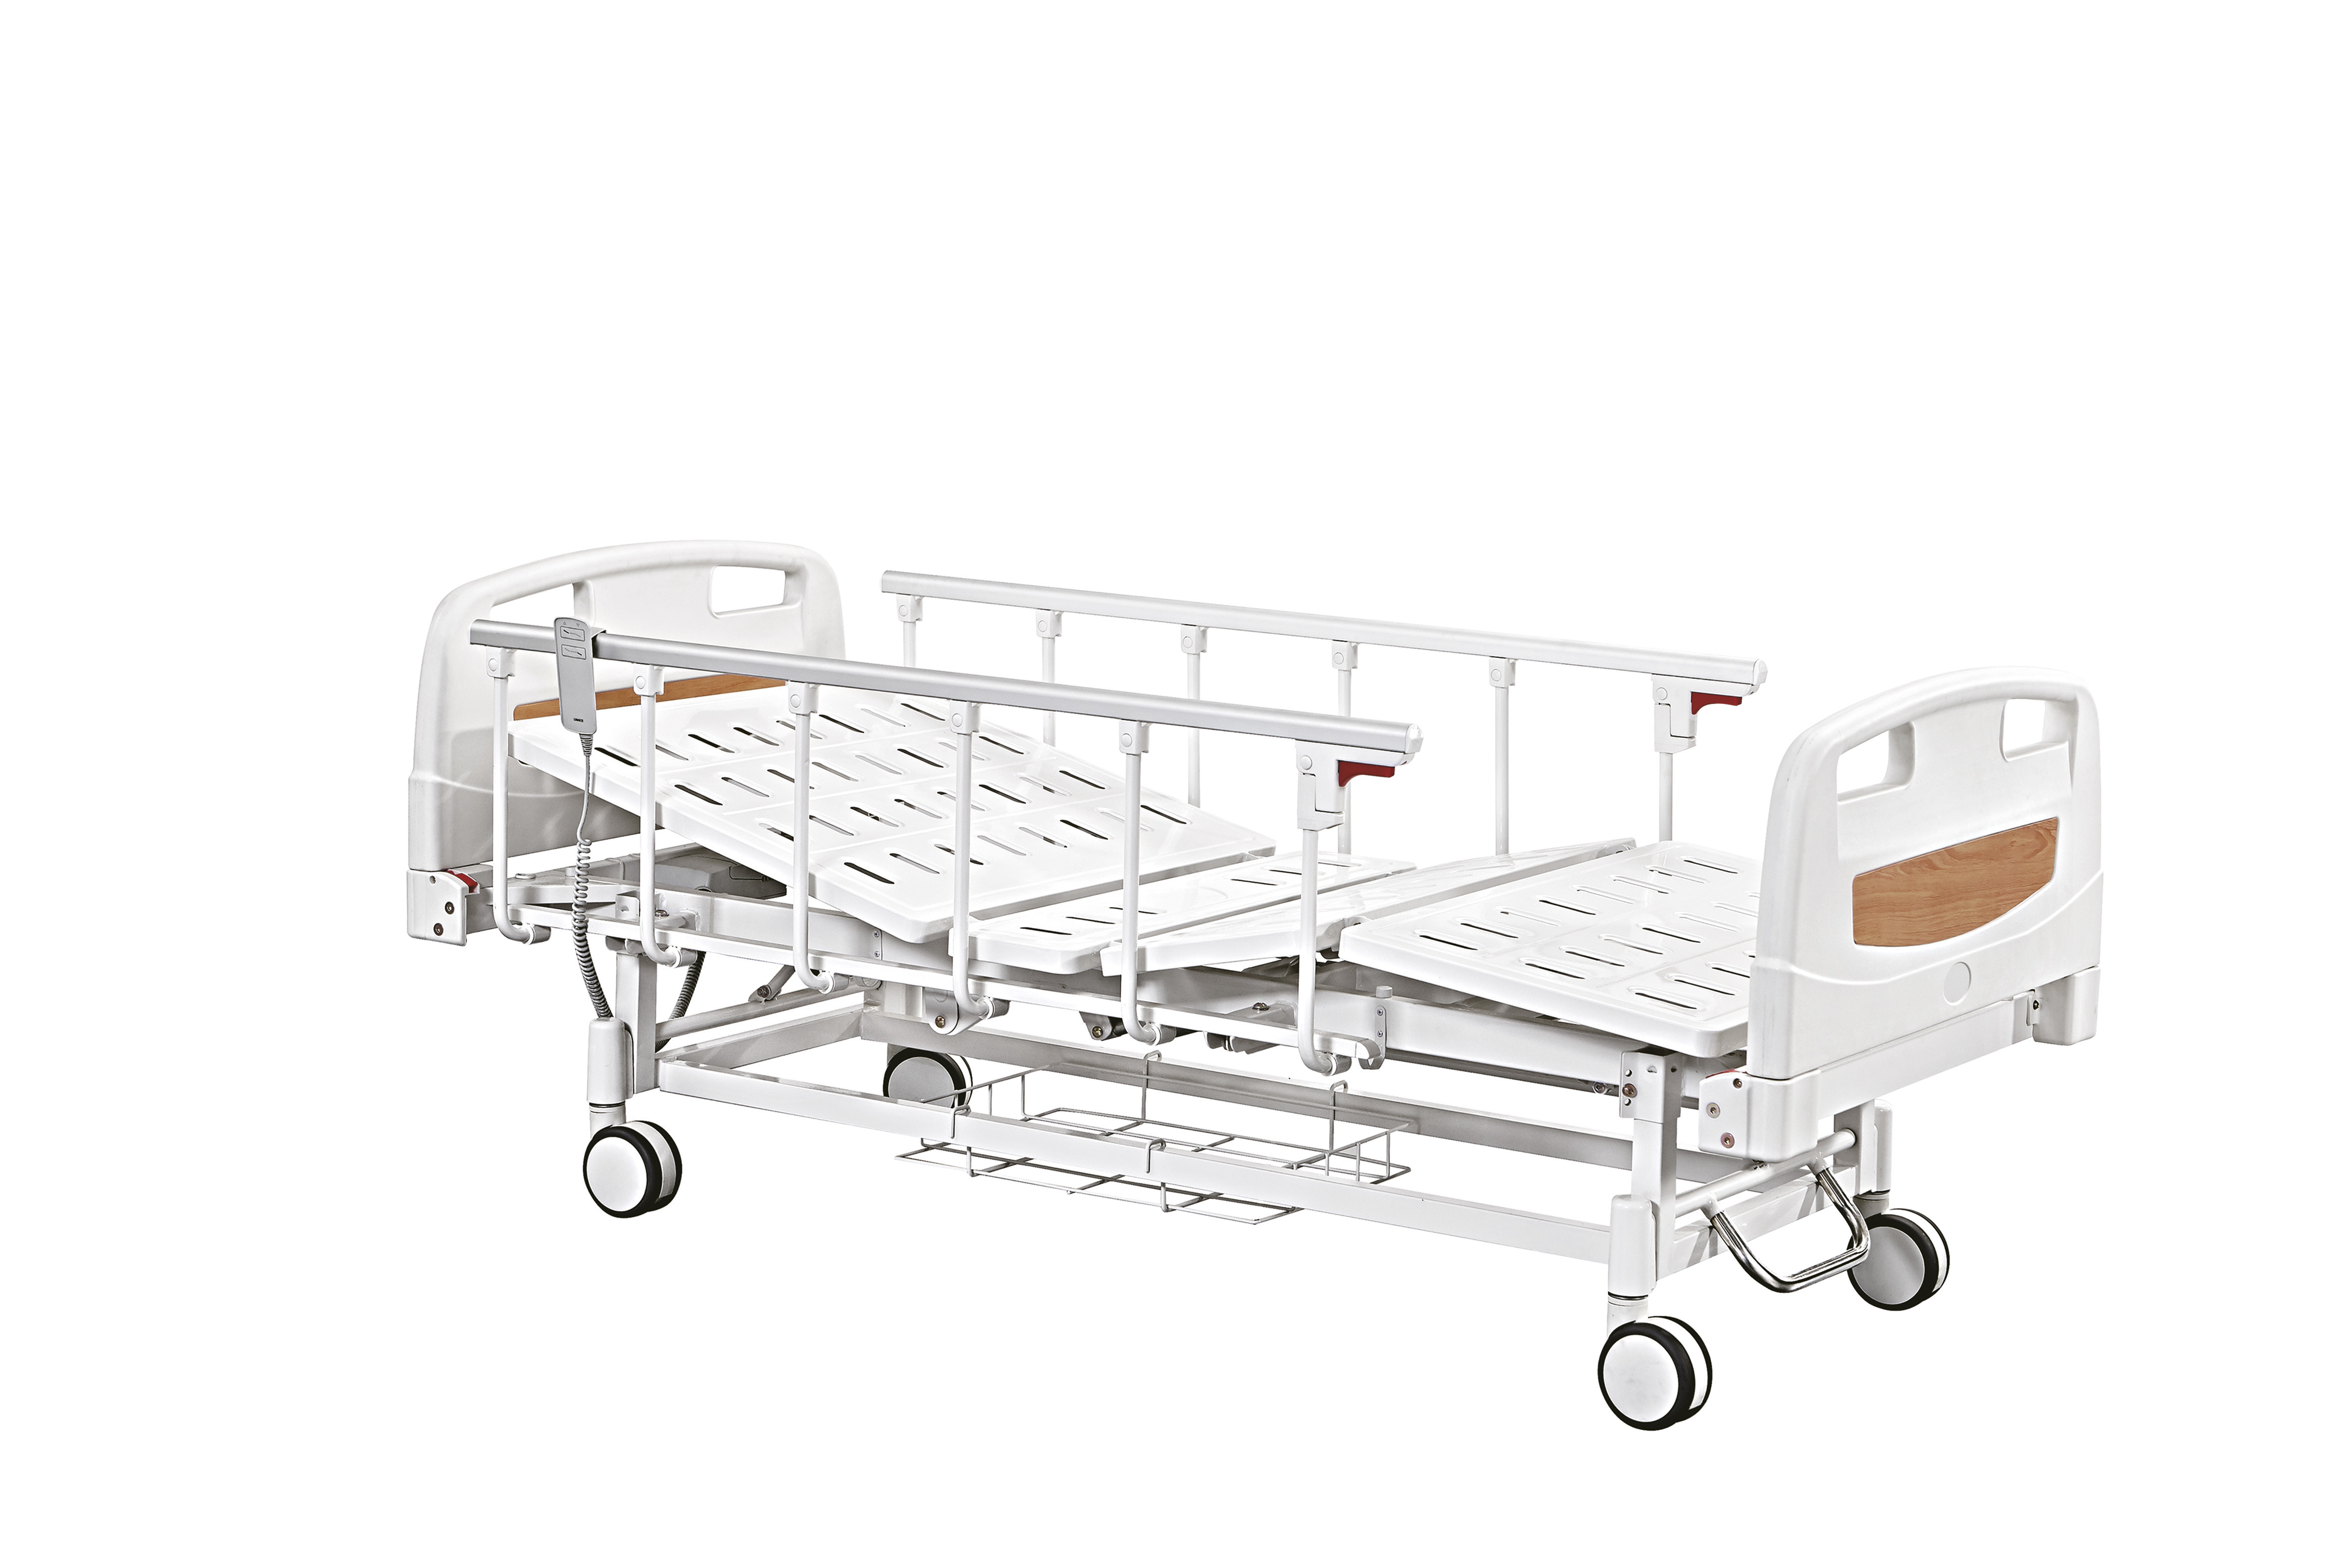  Two Crank Manual Care Bed PP Head Board Central Control Wheel Manual Hospital Bed Manufactures